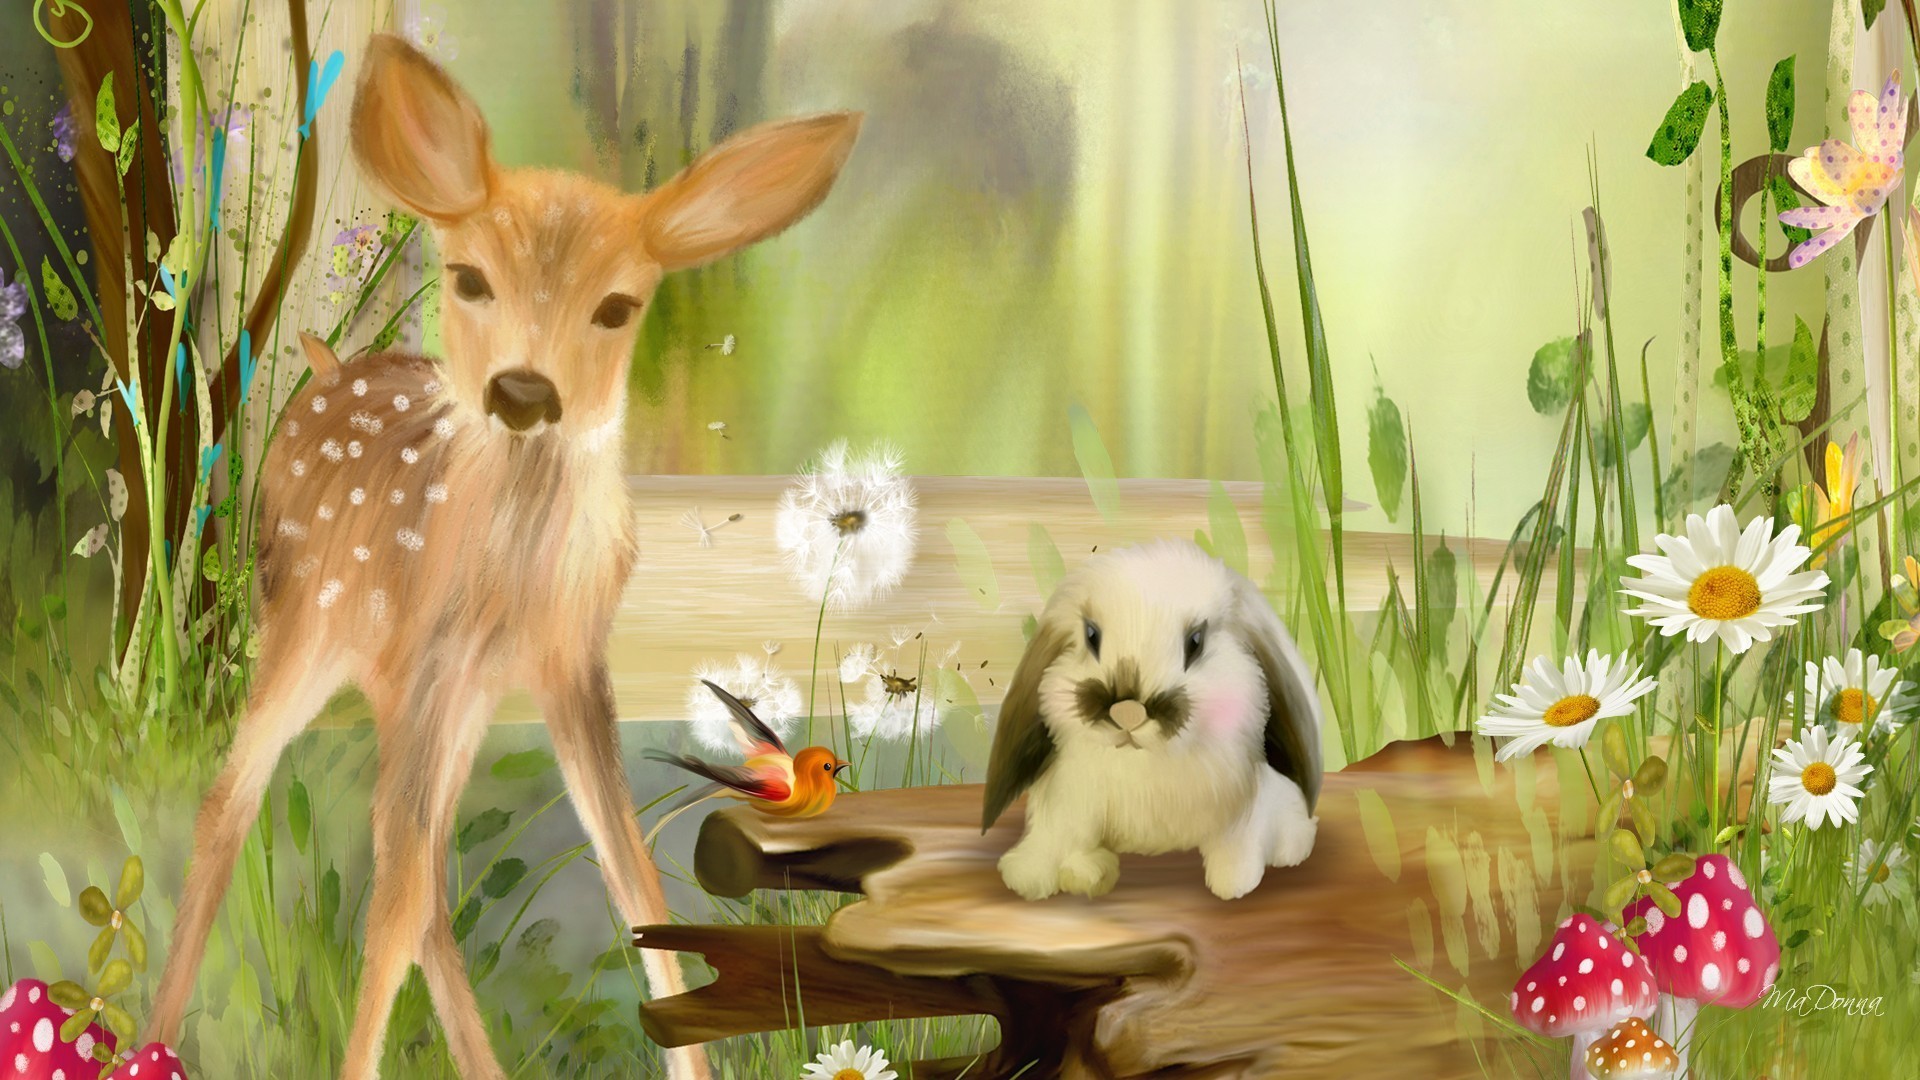 Sweet fawn and spring bunny wallpaper